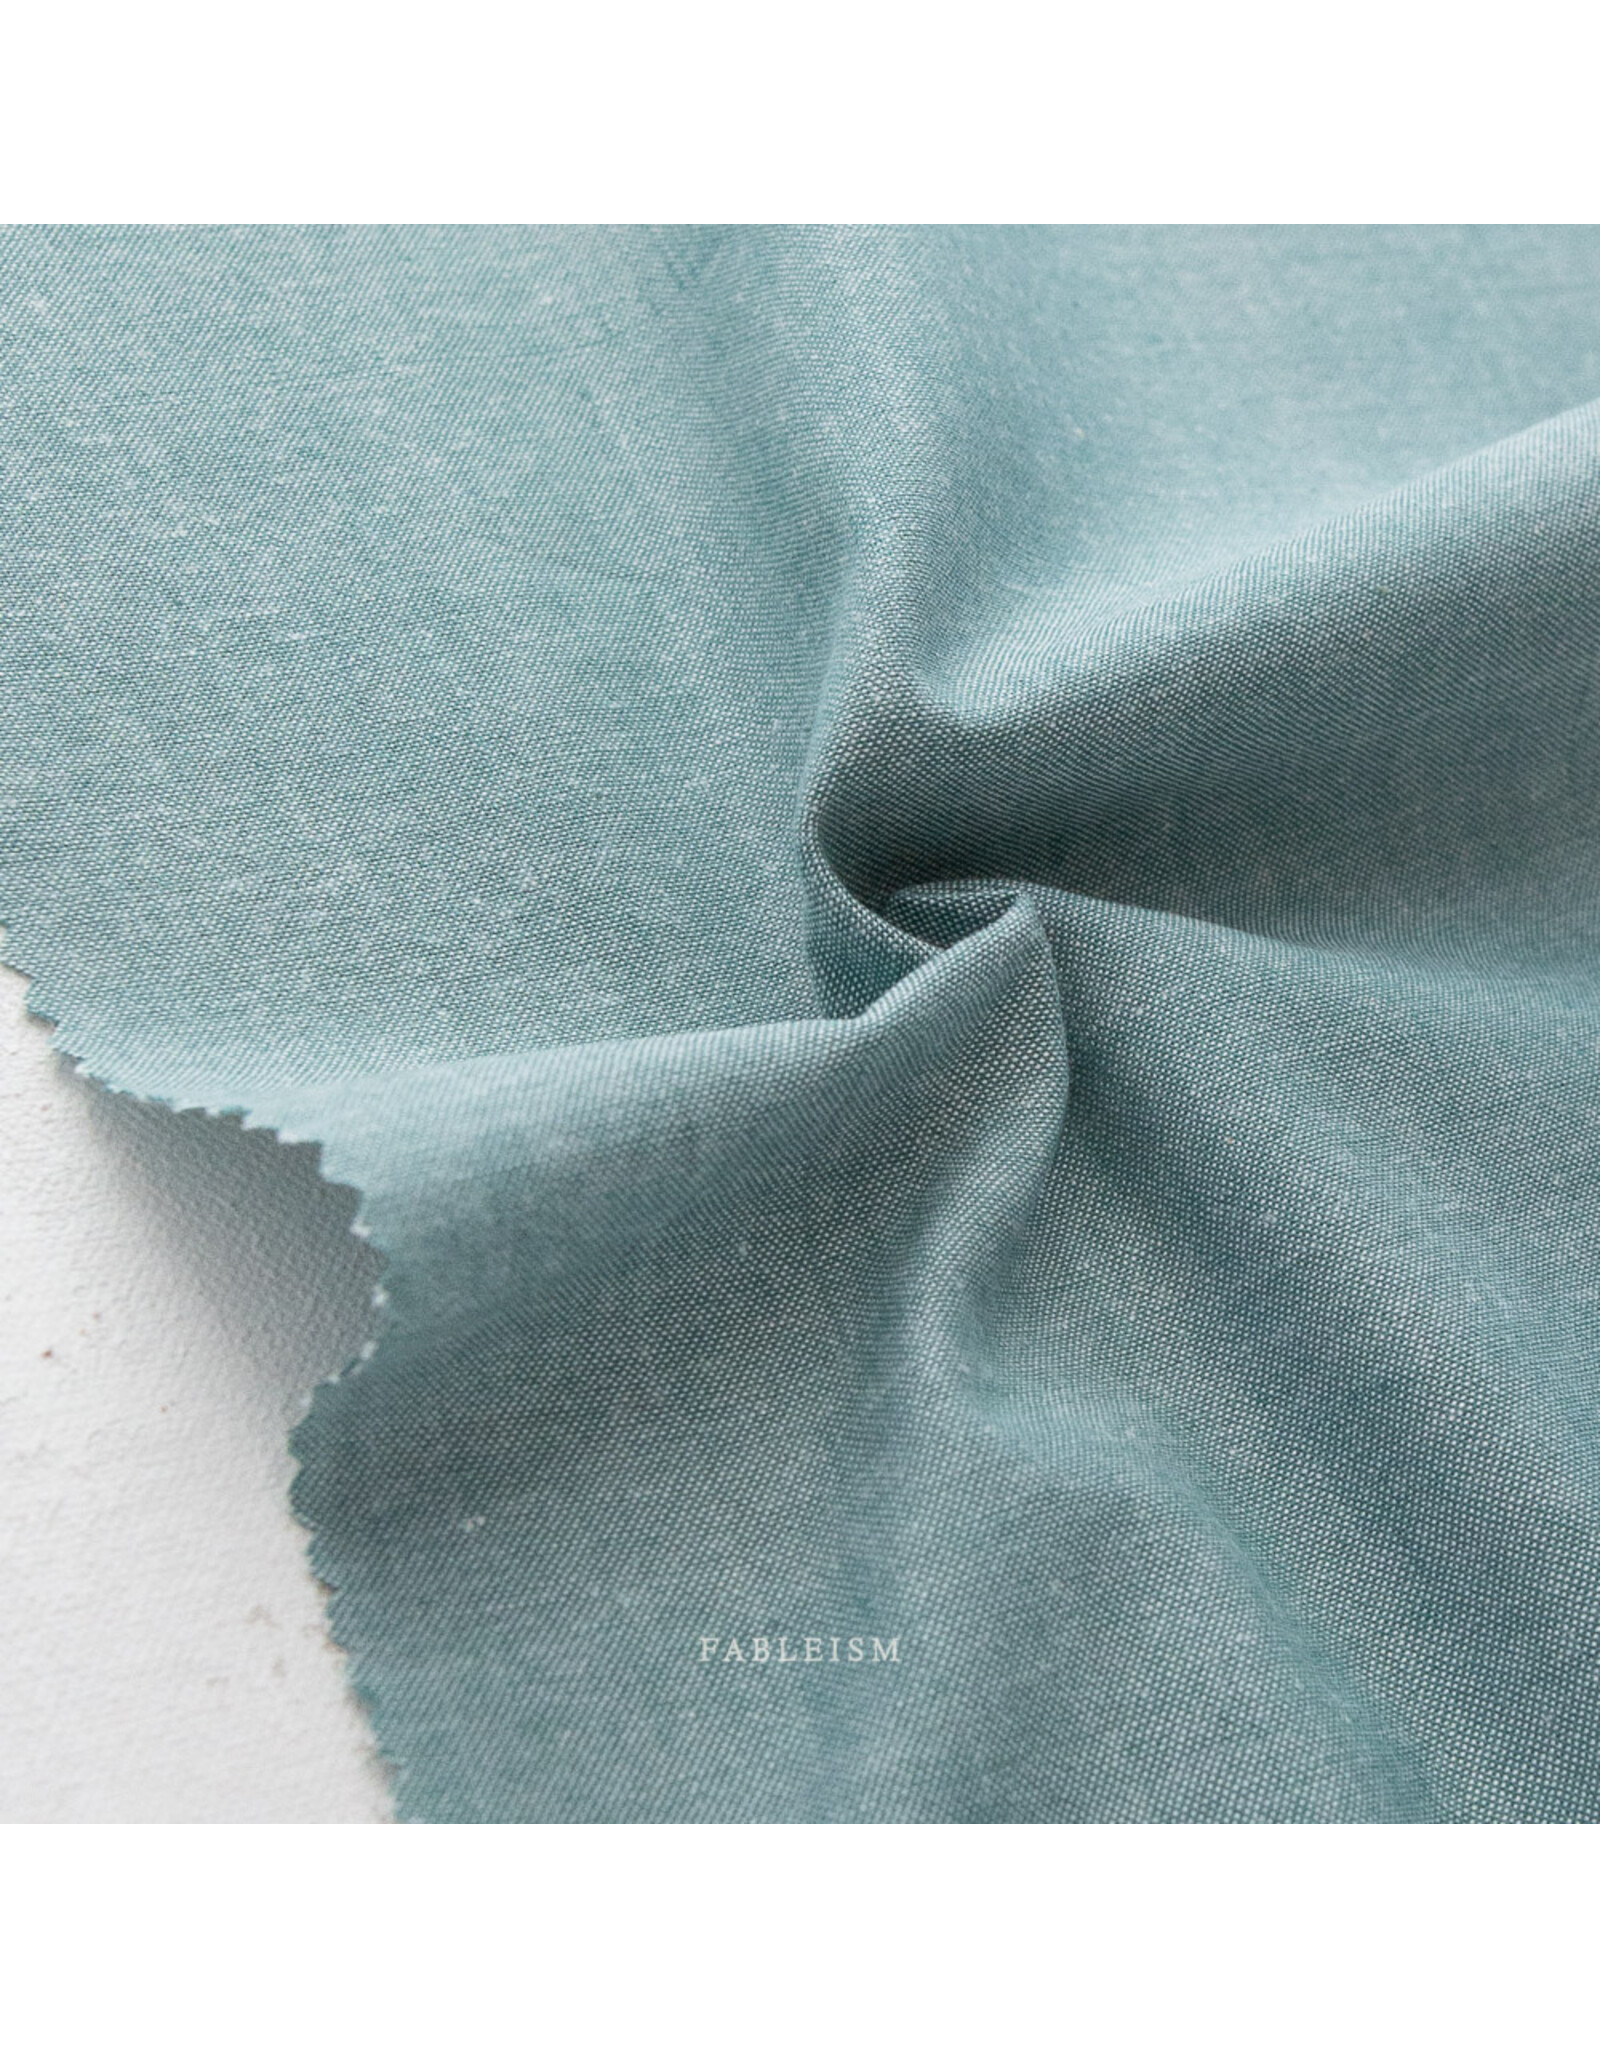 Fableism Everyday Chambray, Bay Leaf, Fabric Half-Yards